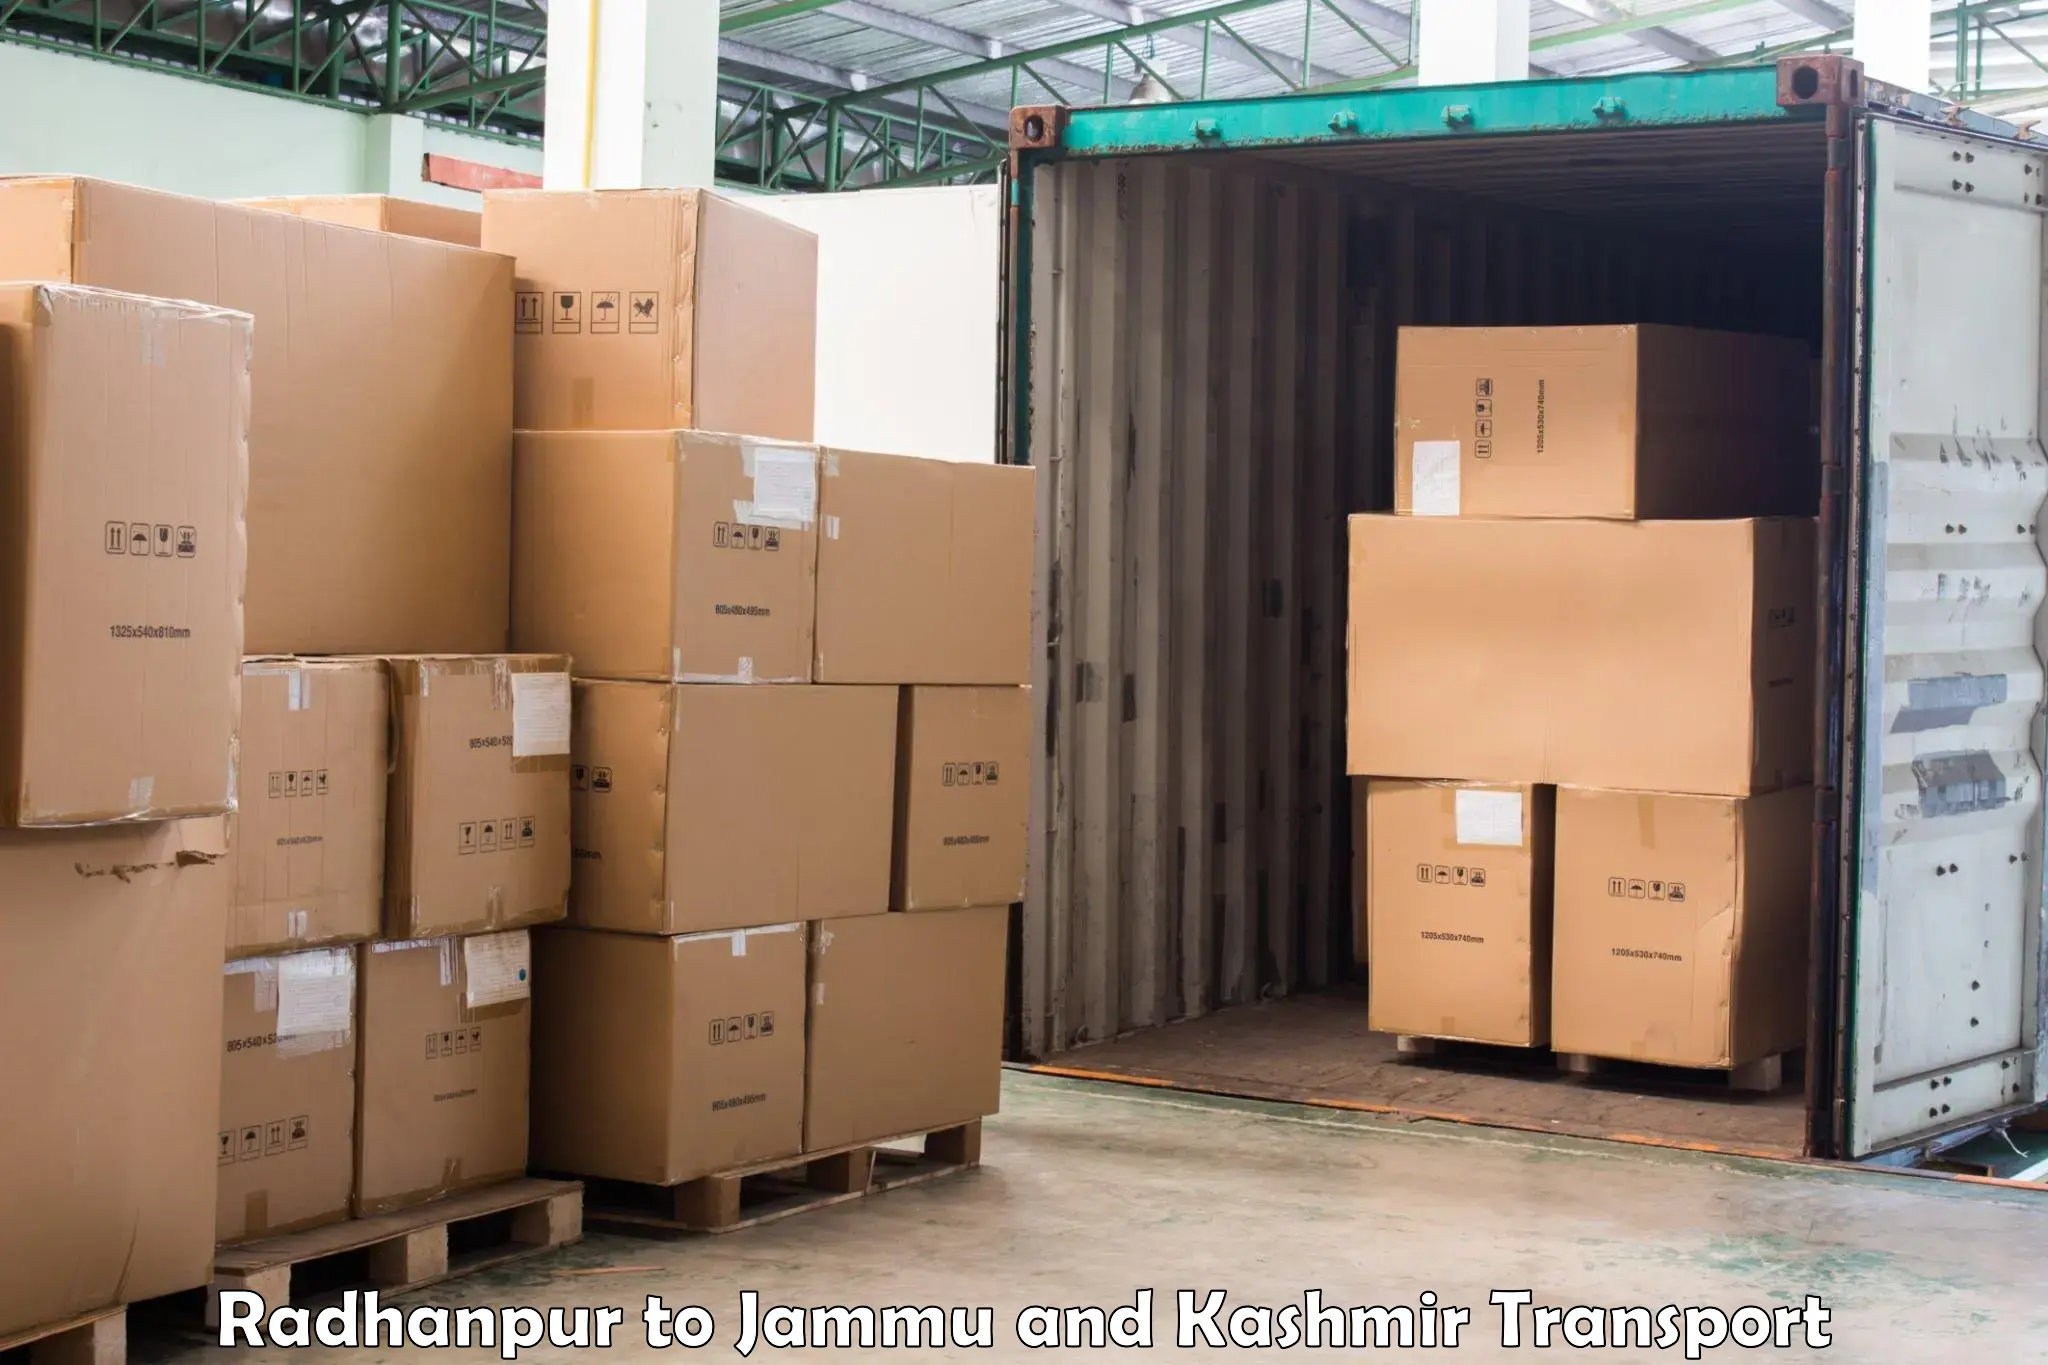 Express transport services Radhanpur to Jammu and Kashmir